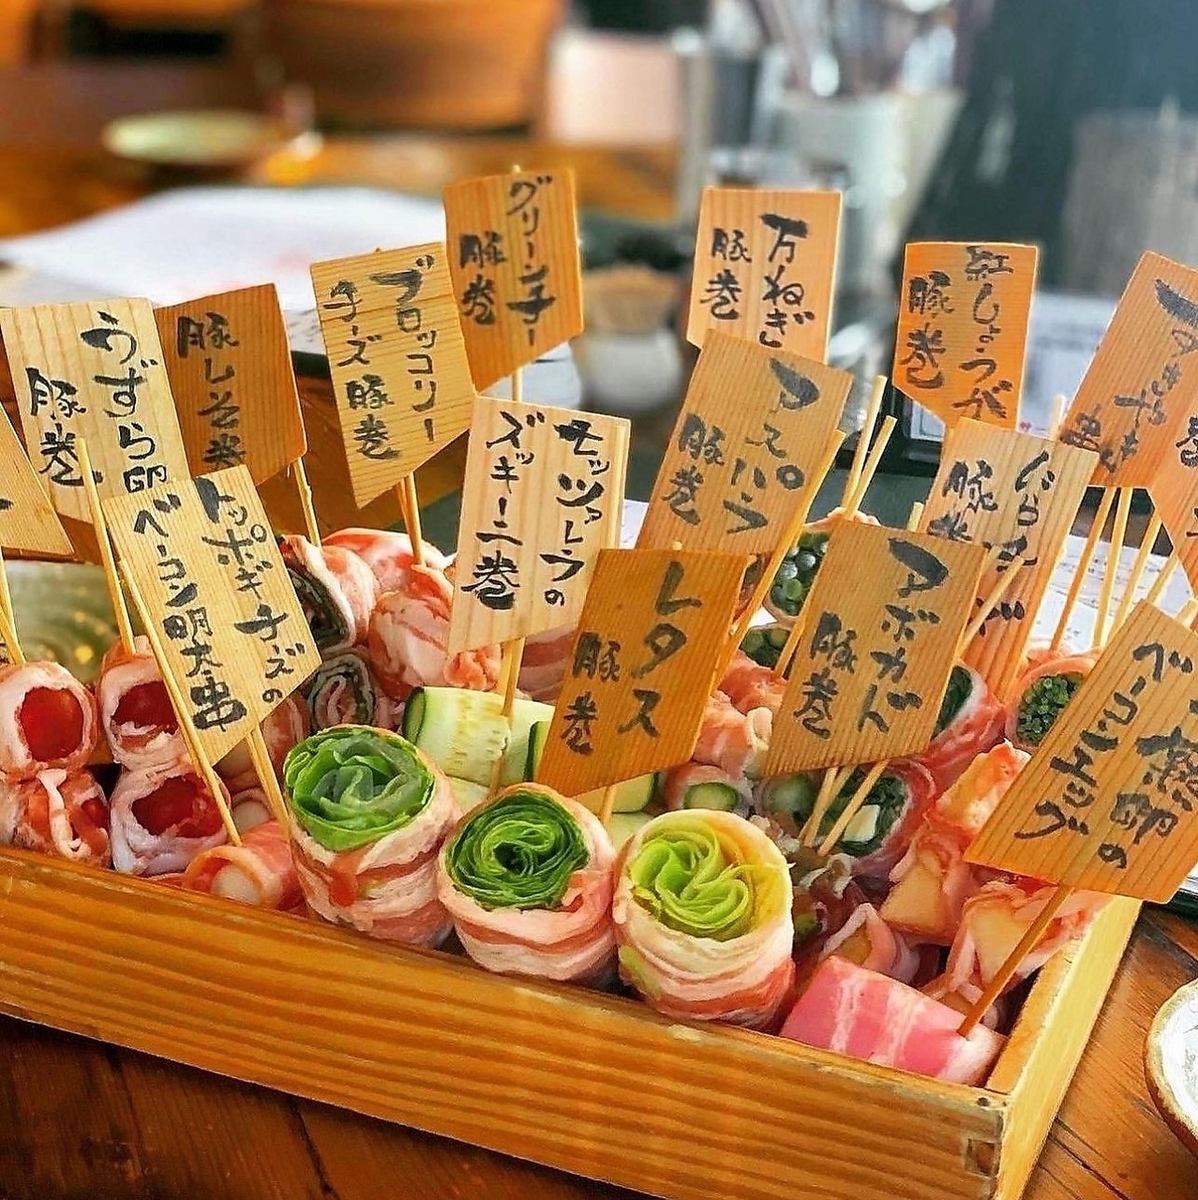 Very popular with women♪ All 20 types of Hakata specialty vegetable roll skewers!! Private rooms are also available◎